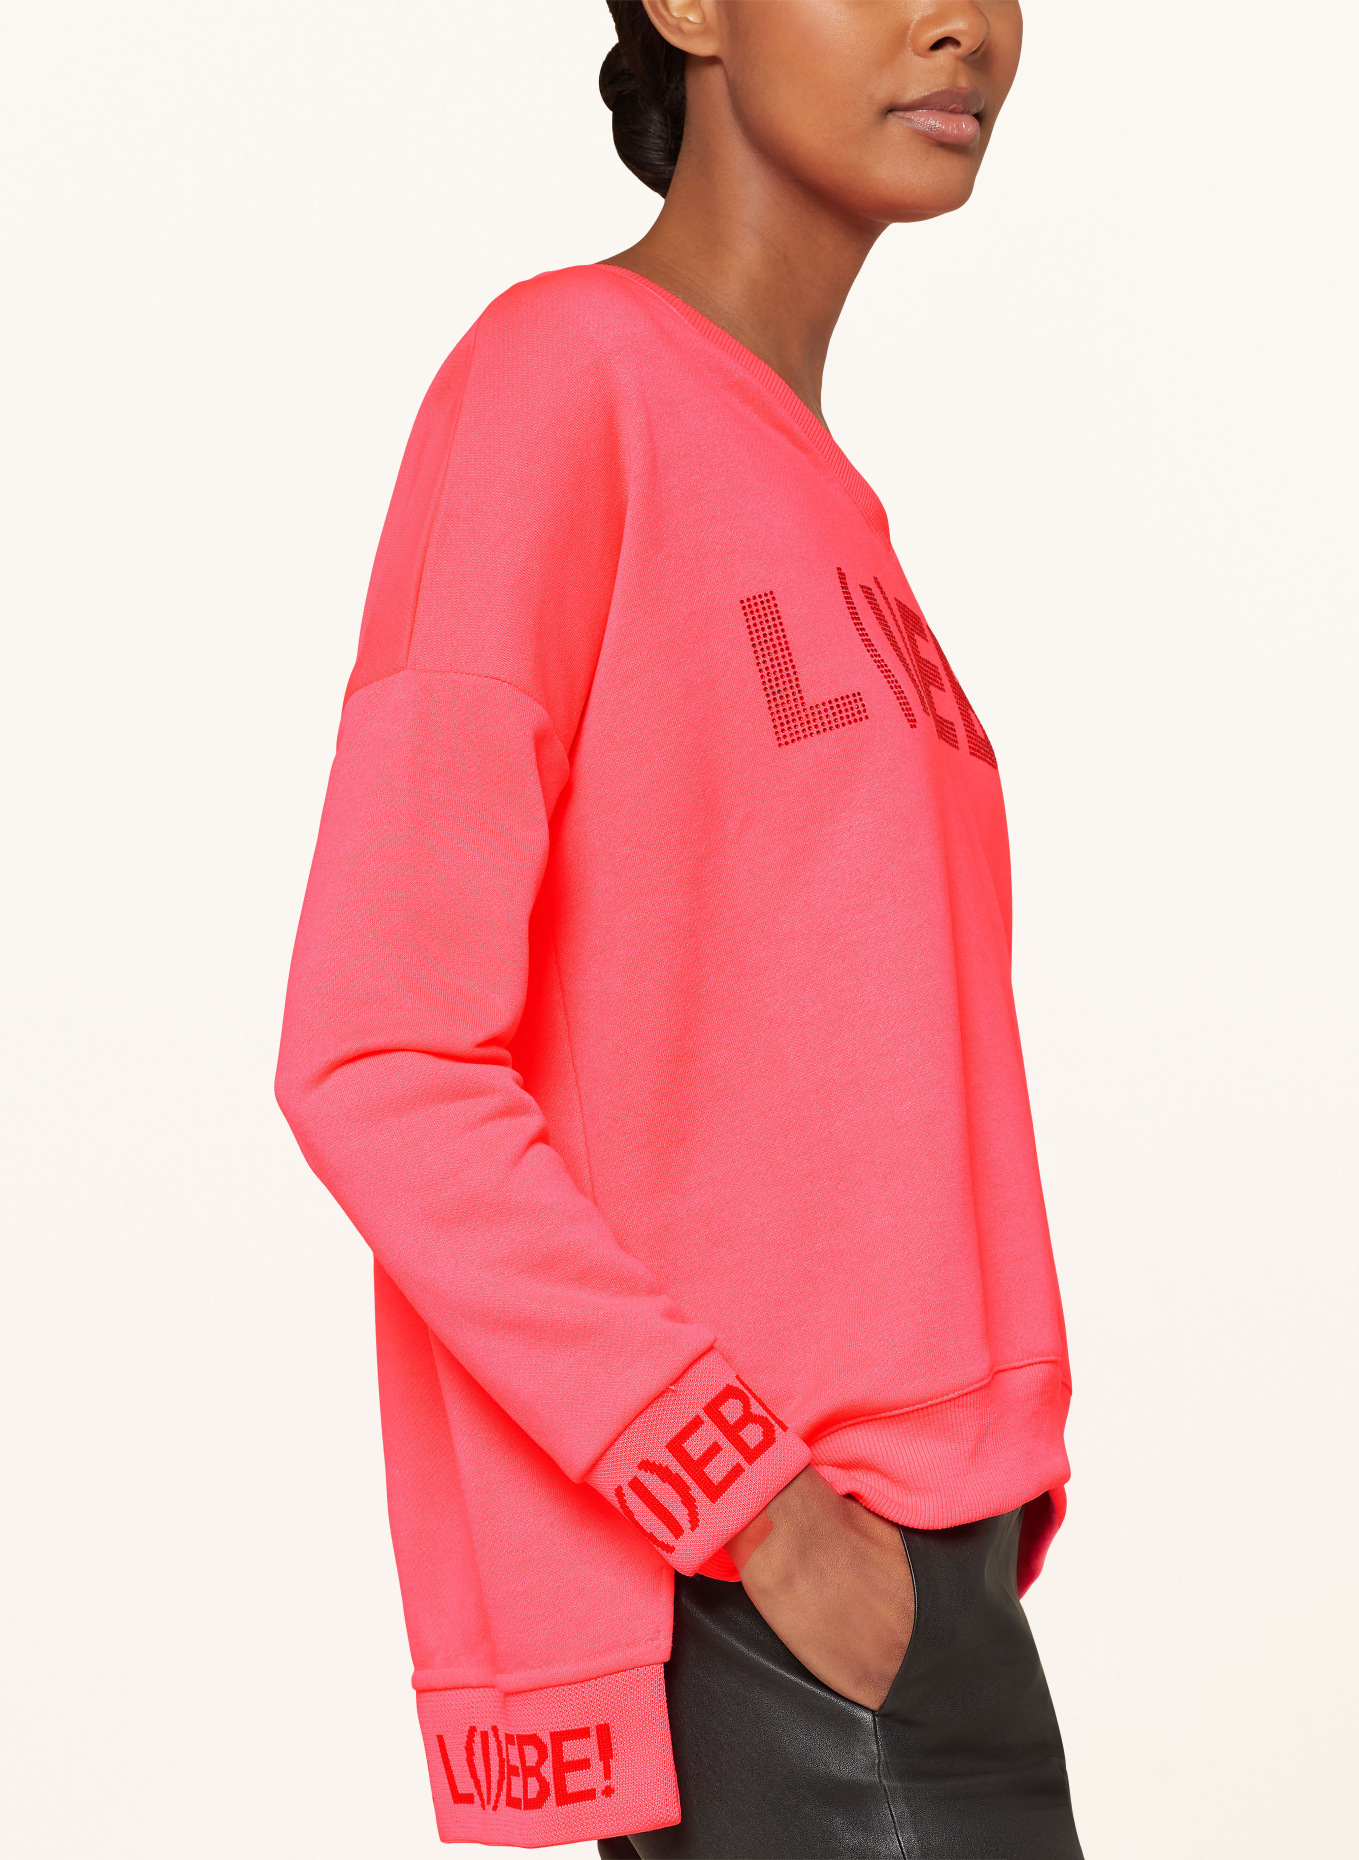 miss goodlife Sweatshirt with decorative gems, Color: NEON PINK (Image 4)